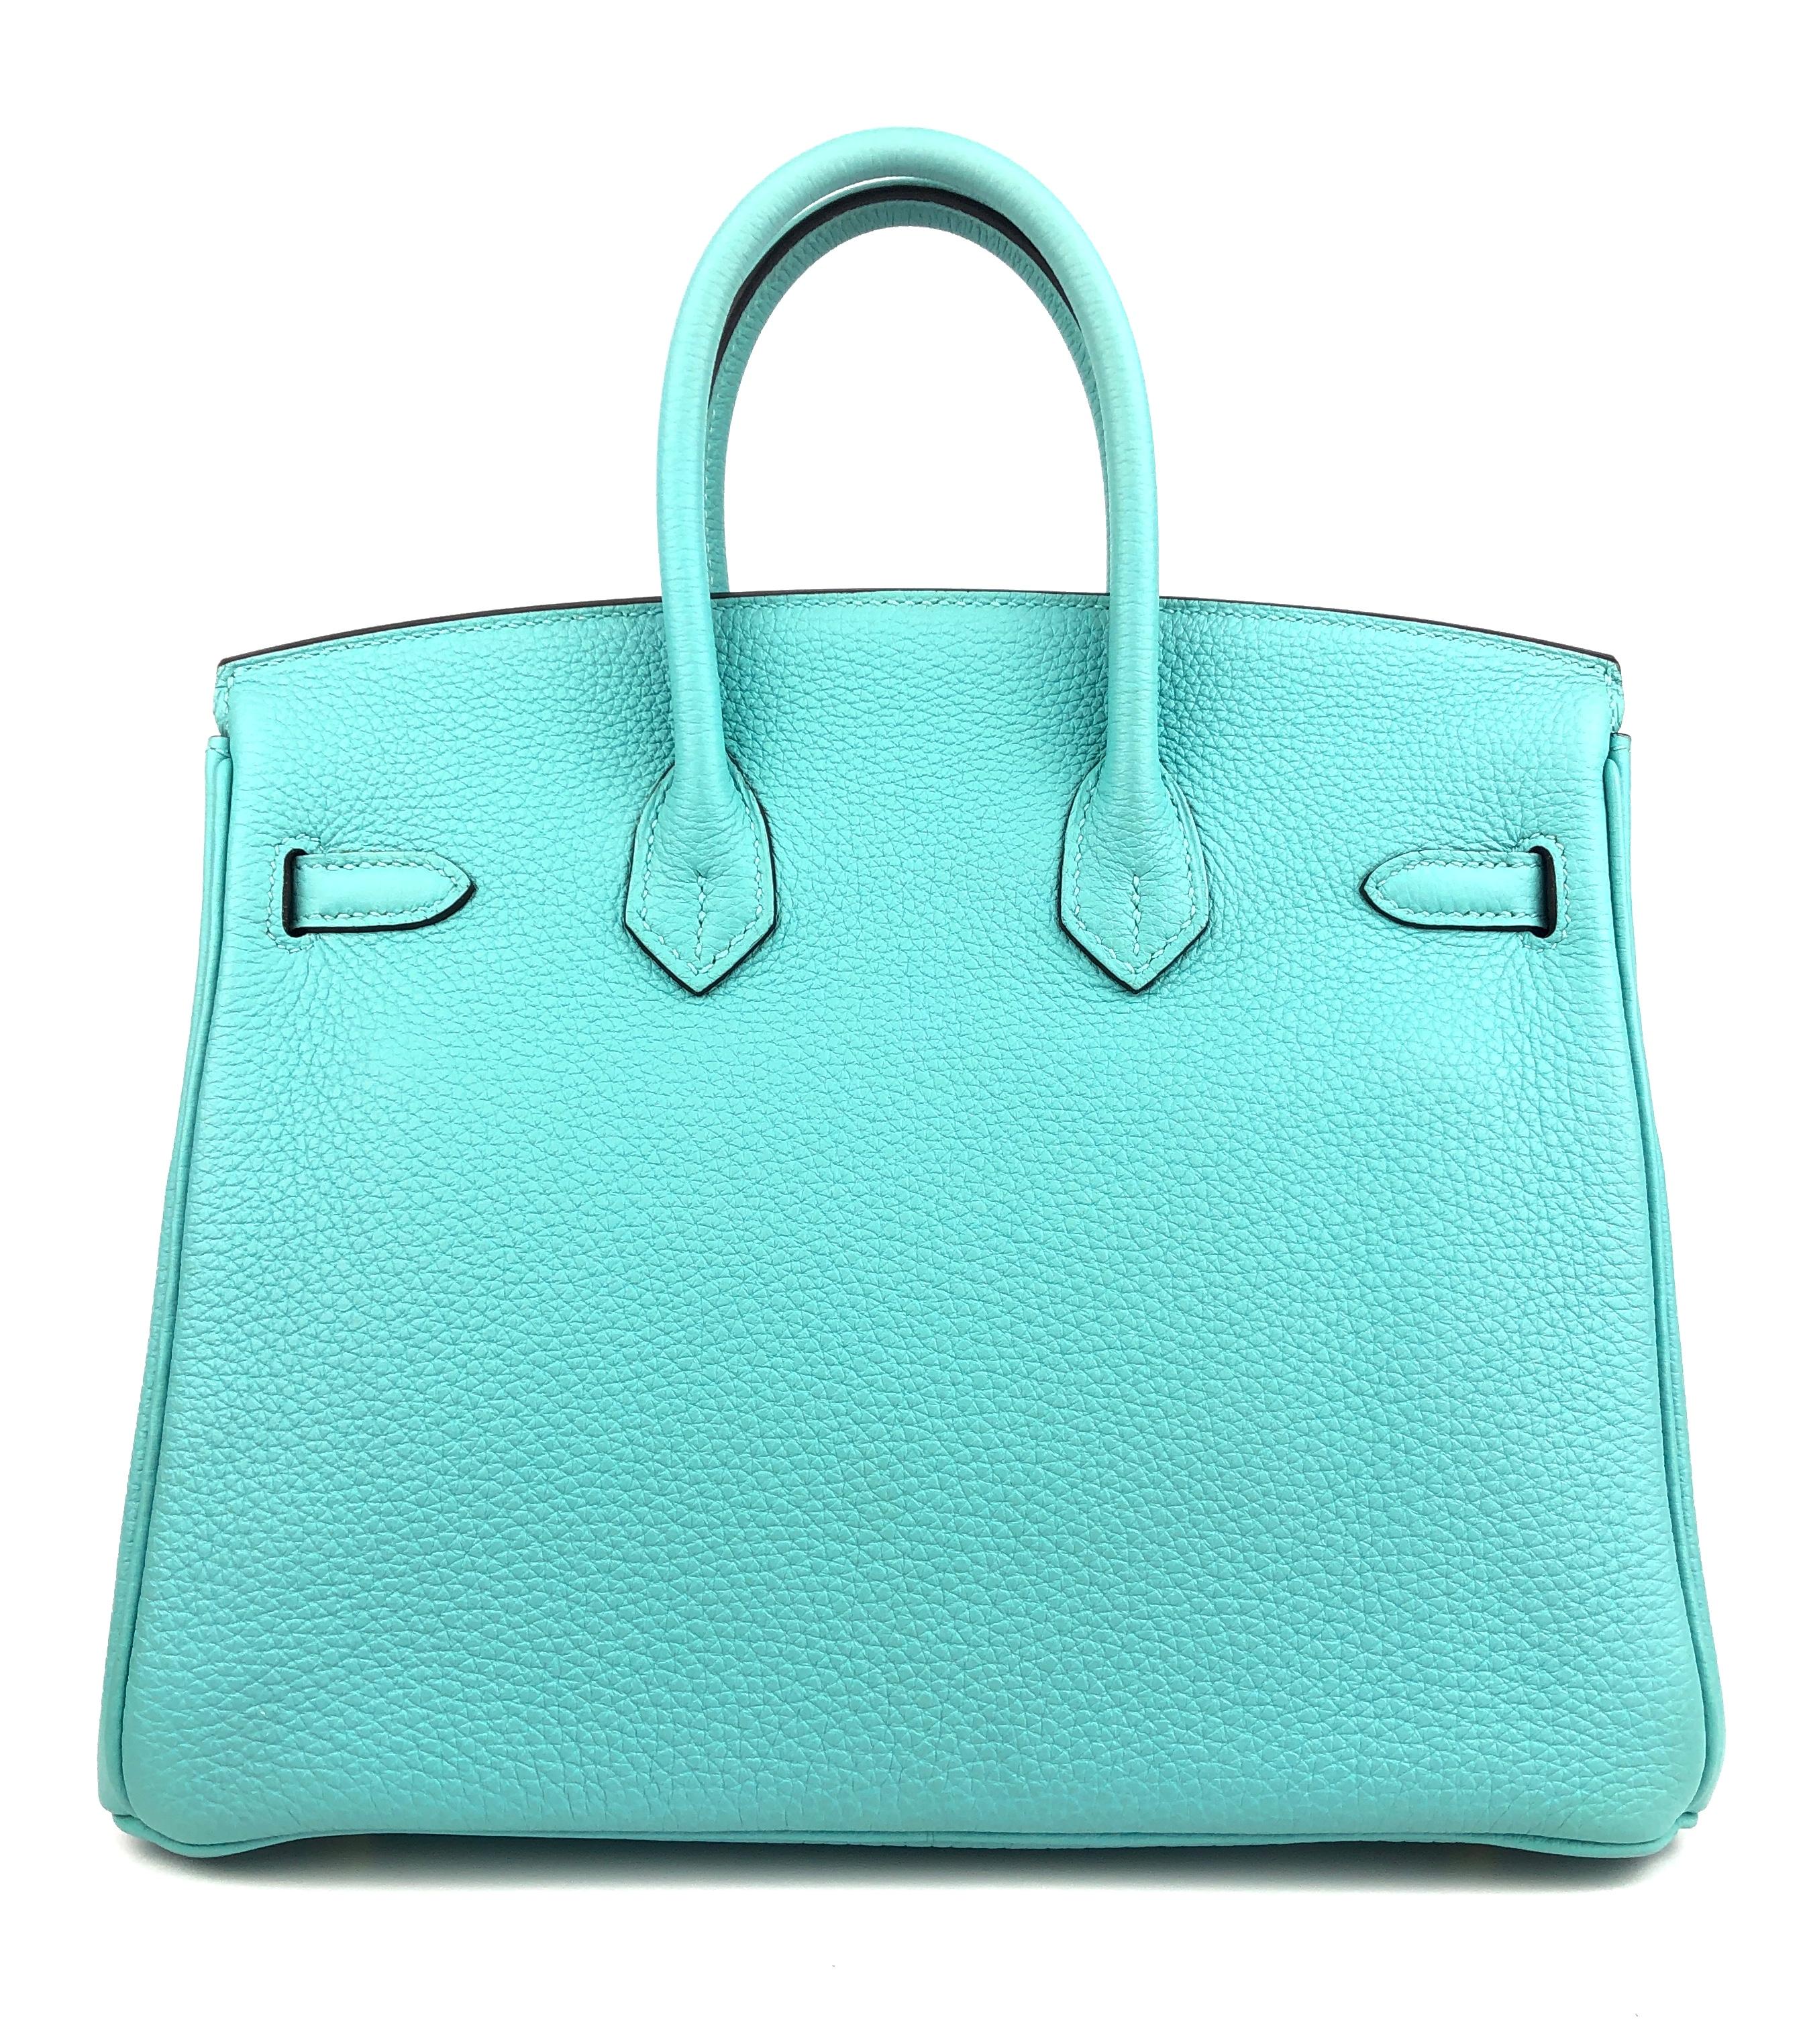 Hermes Birkin 25 Blue Atoll Tiffany Blue Togo Leather Gold Hardware In Excellent Condition For Sale In Miami, FL